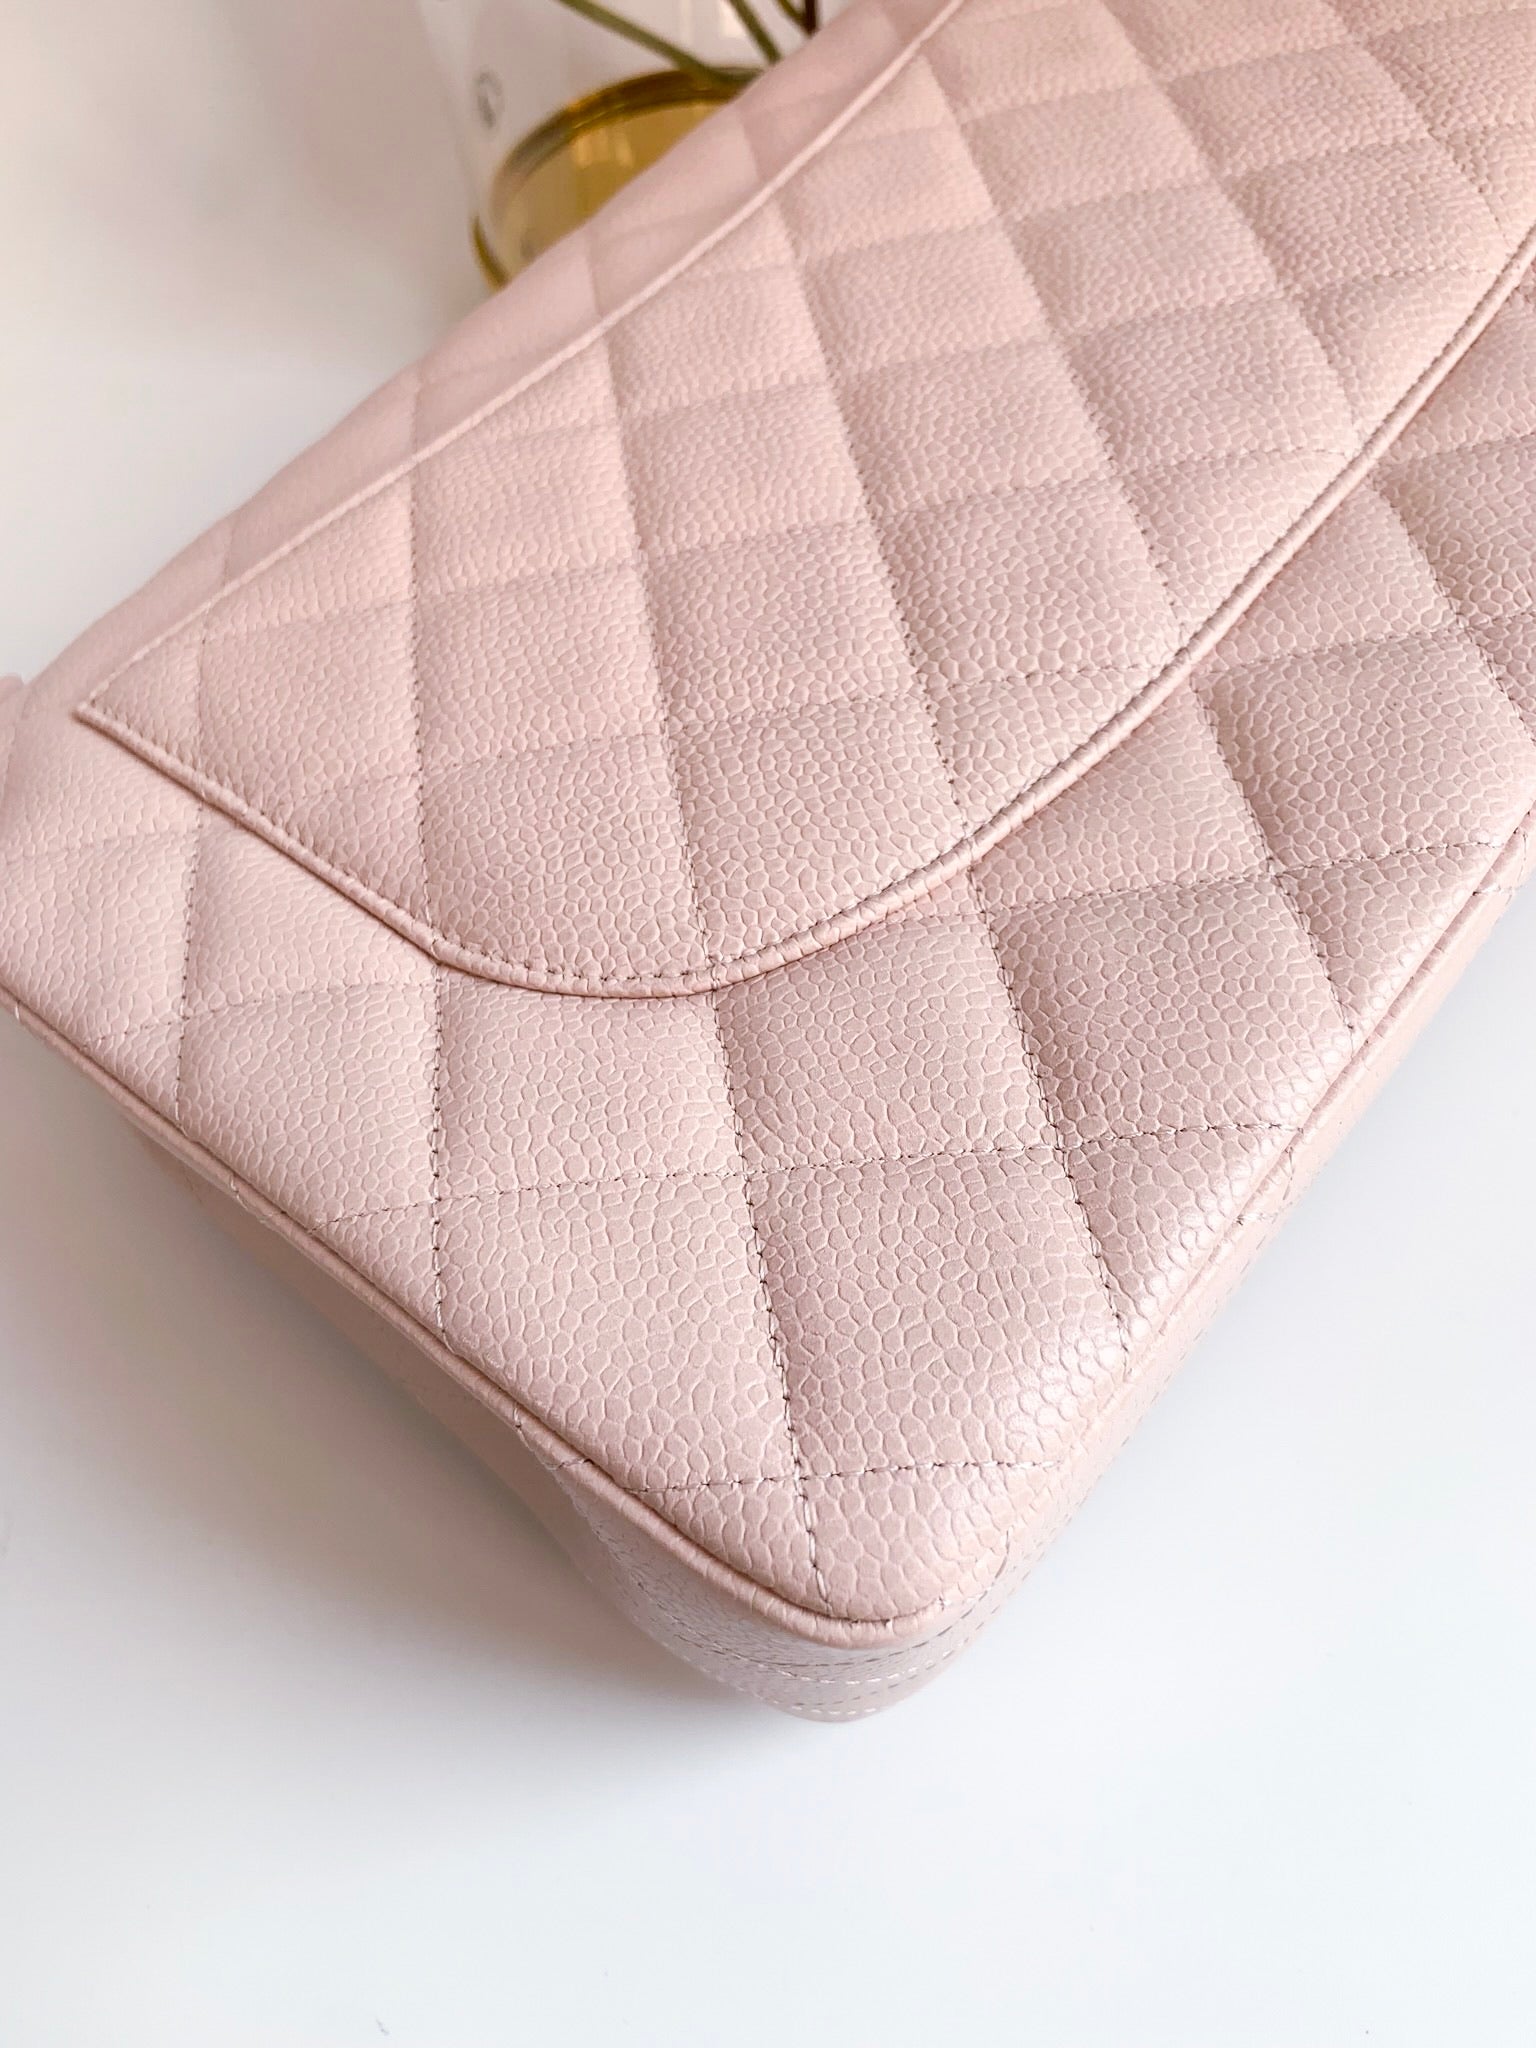 Chanel 14C Sakura Pink Caviar Double Flap Quilted Jumbo SHW